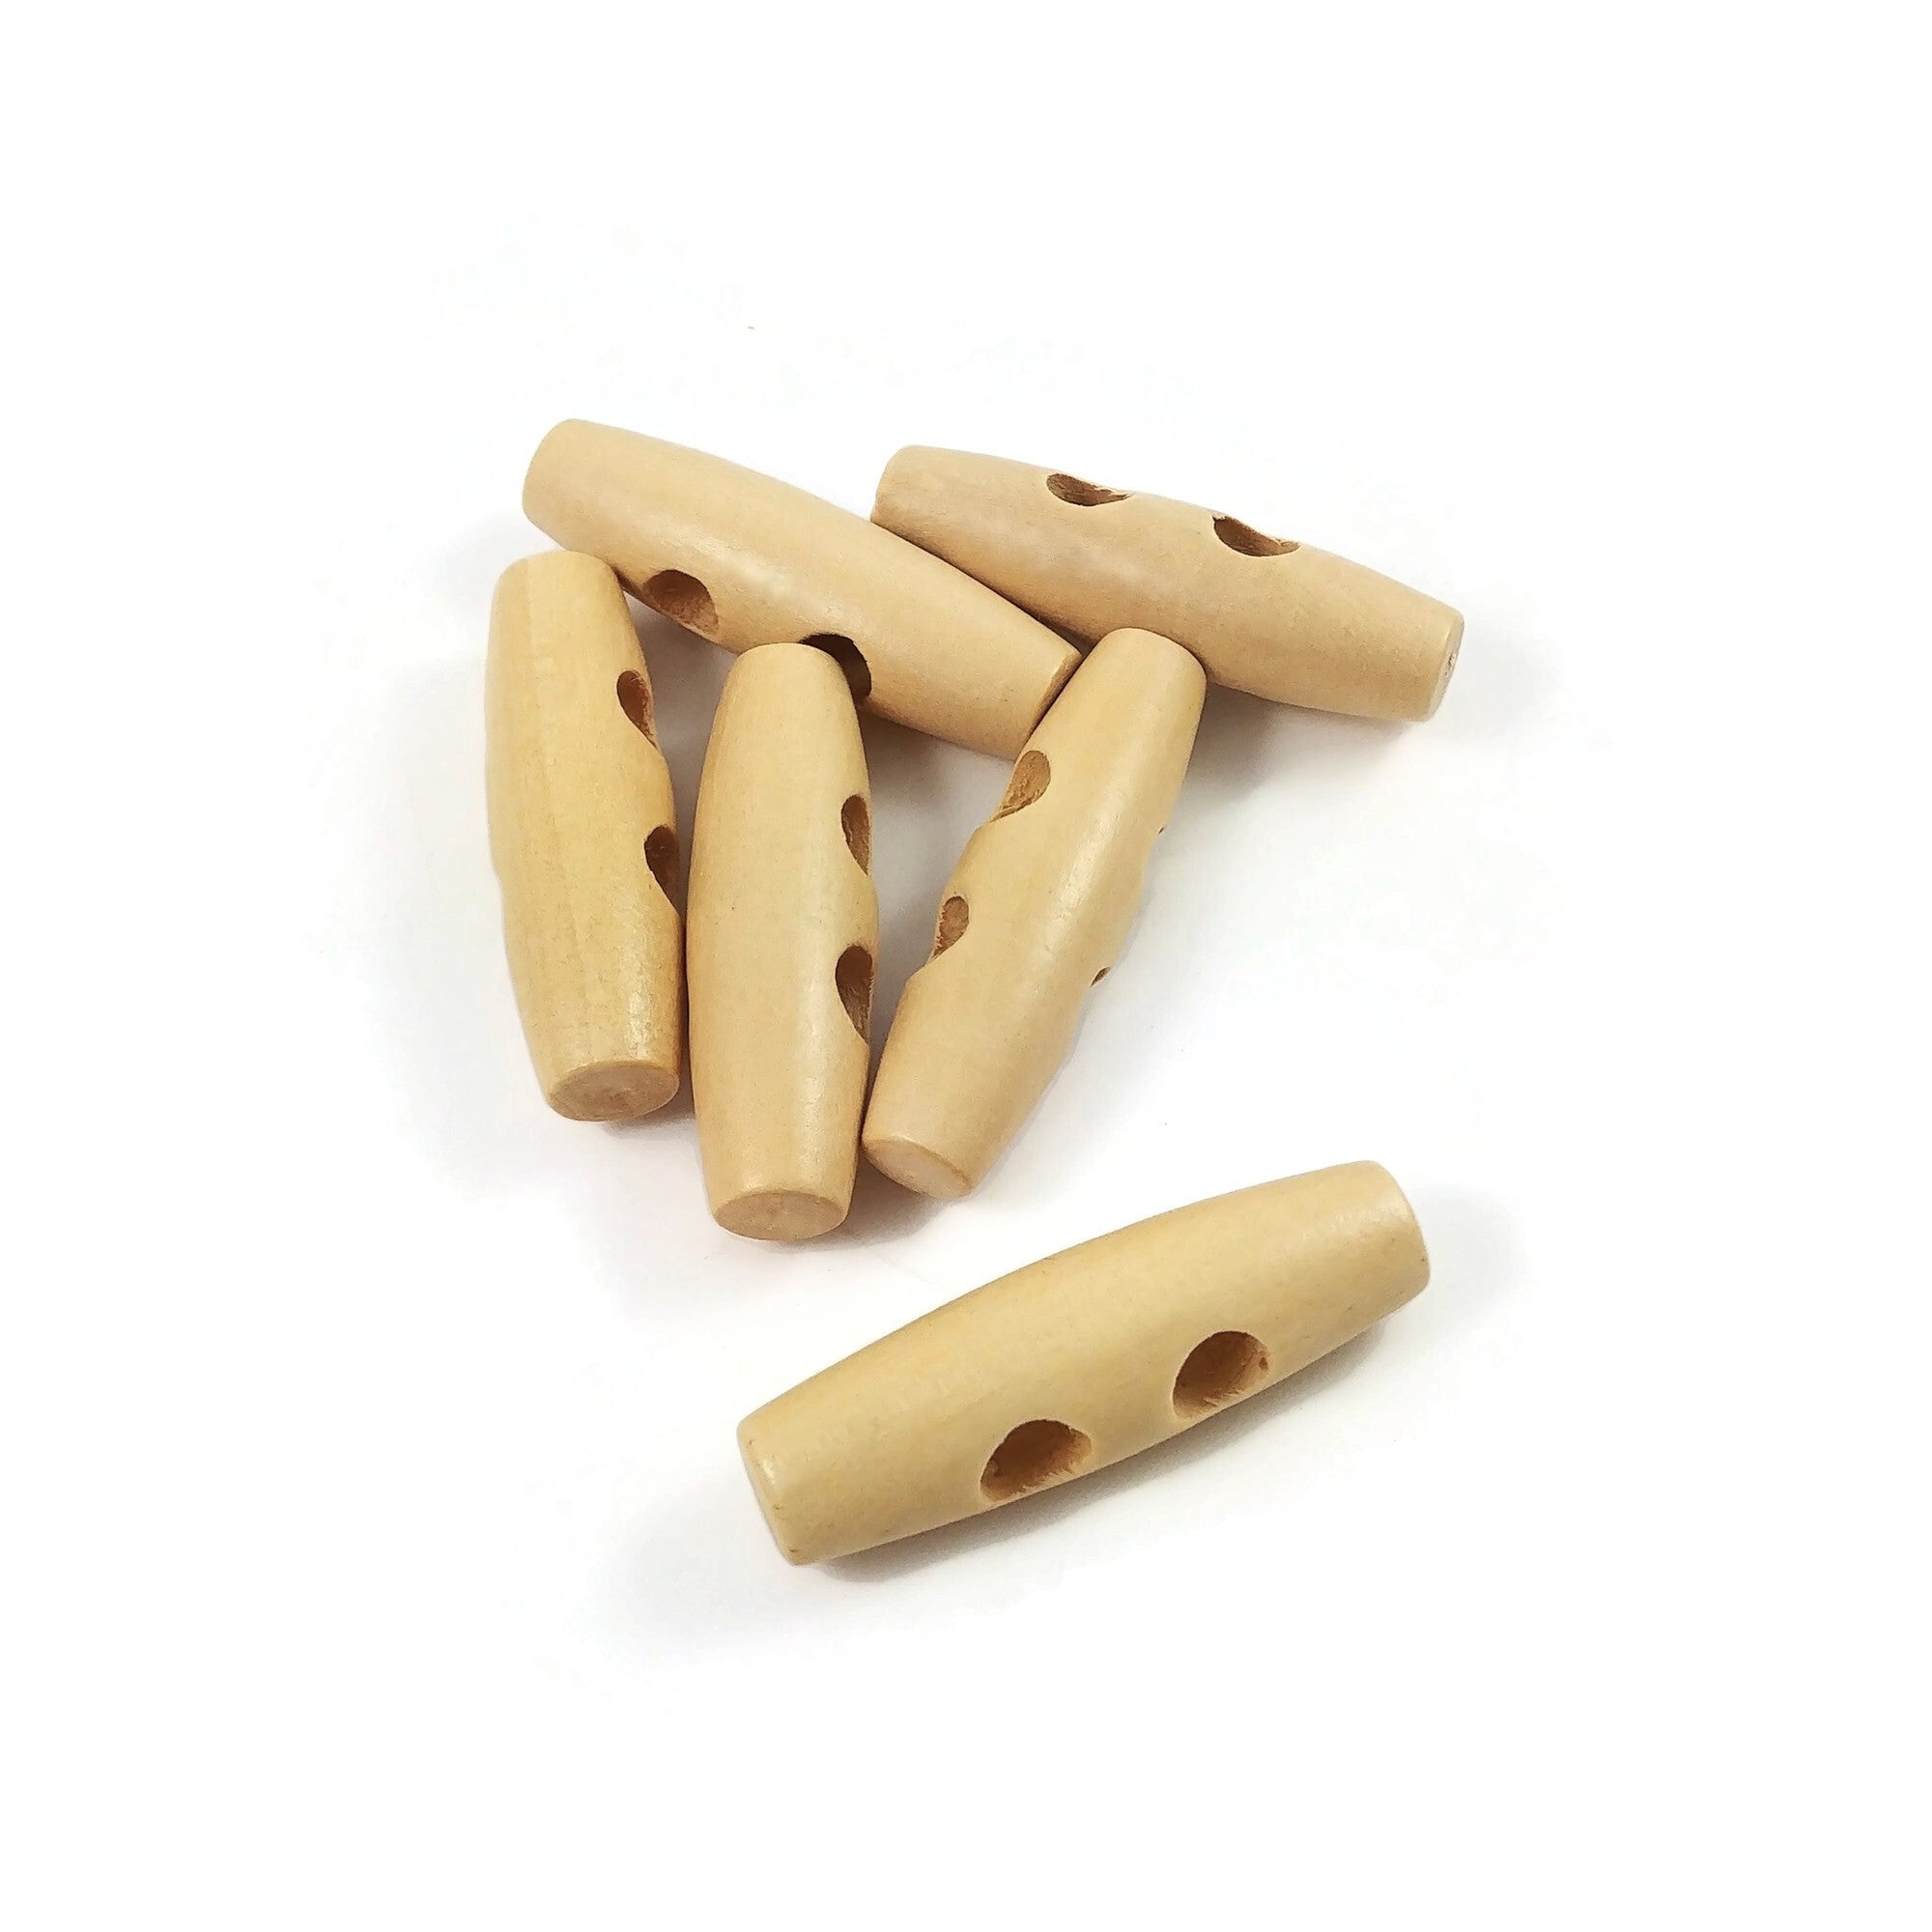 Beige wooden toggle button 40mm